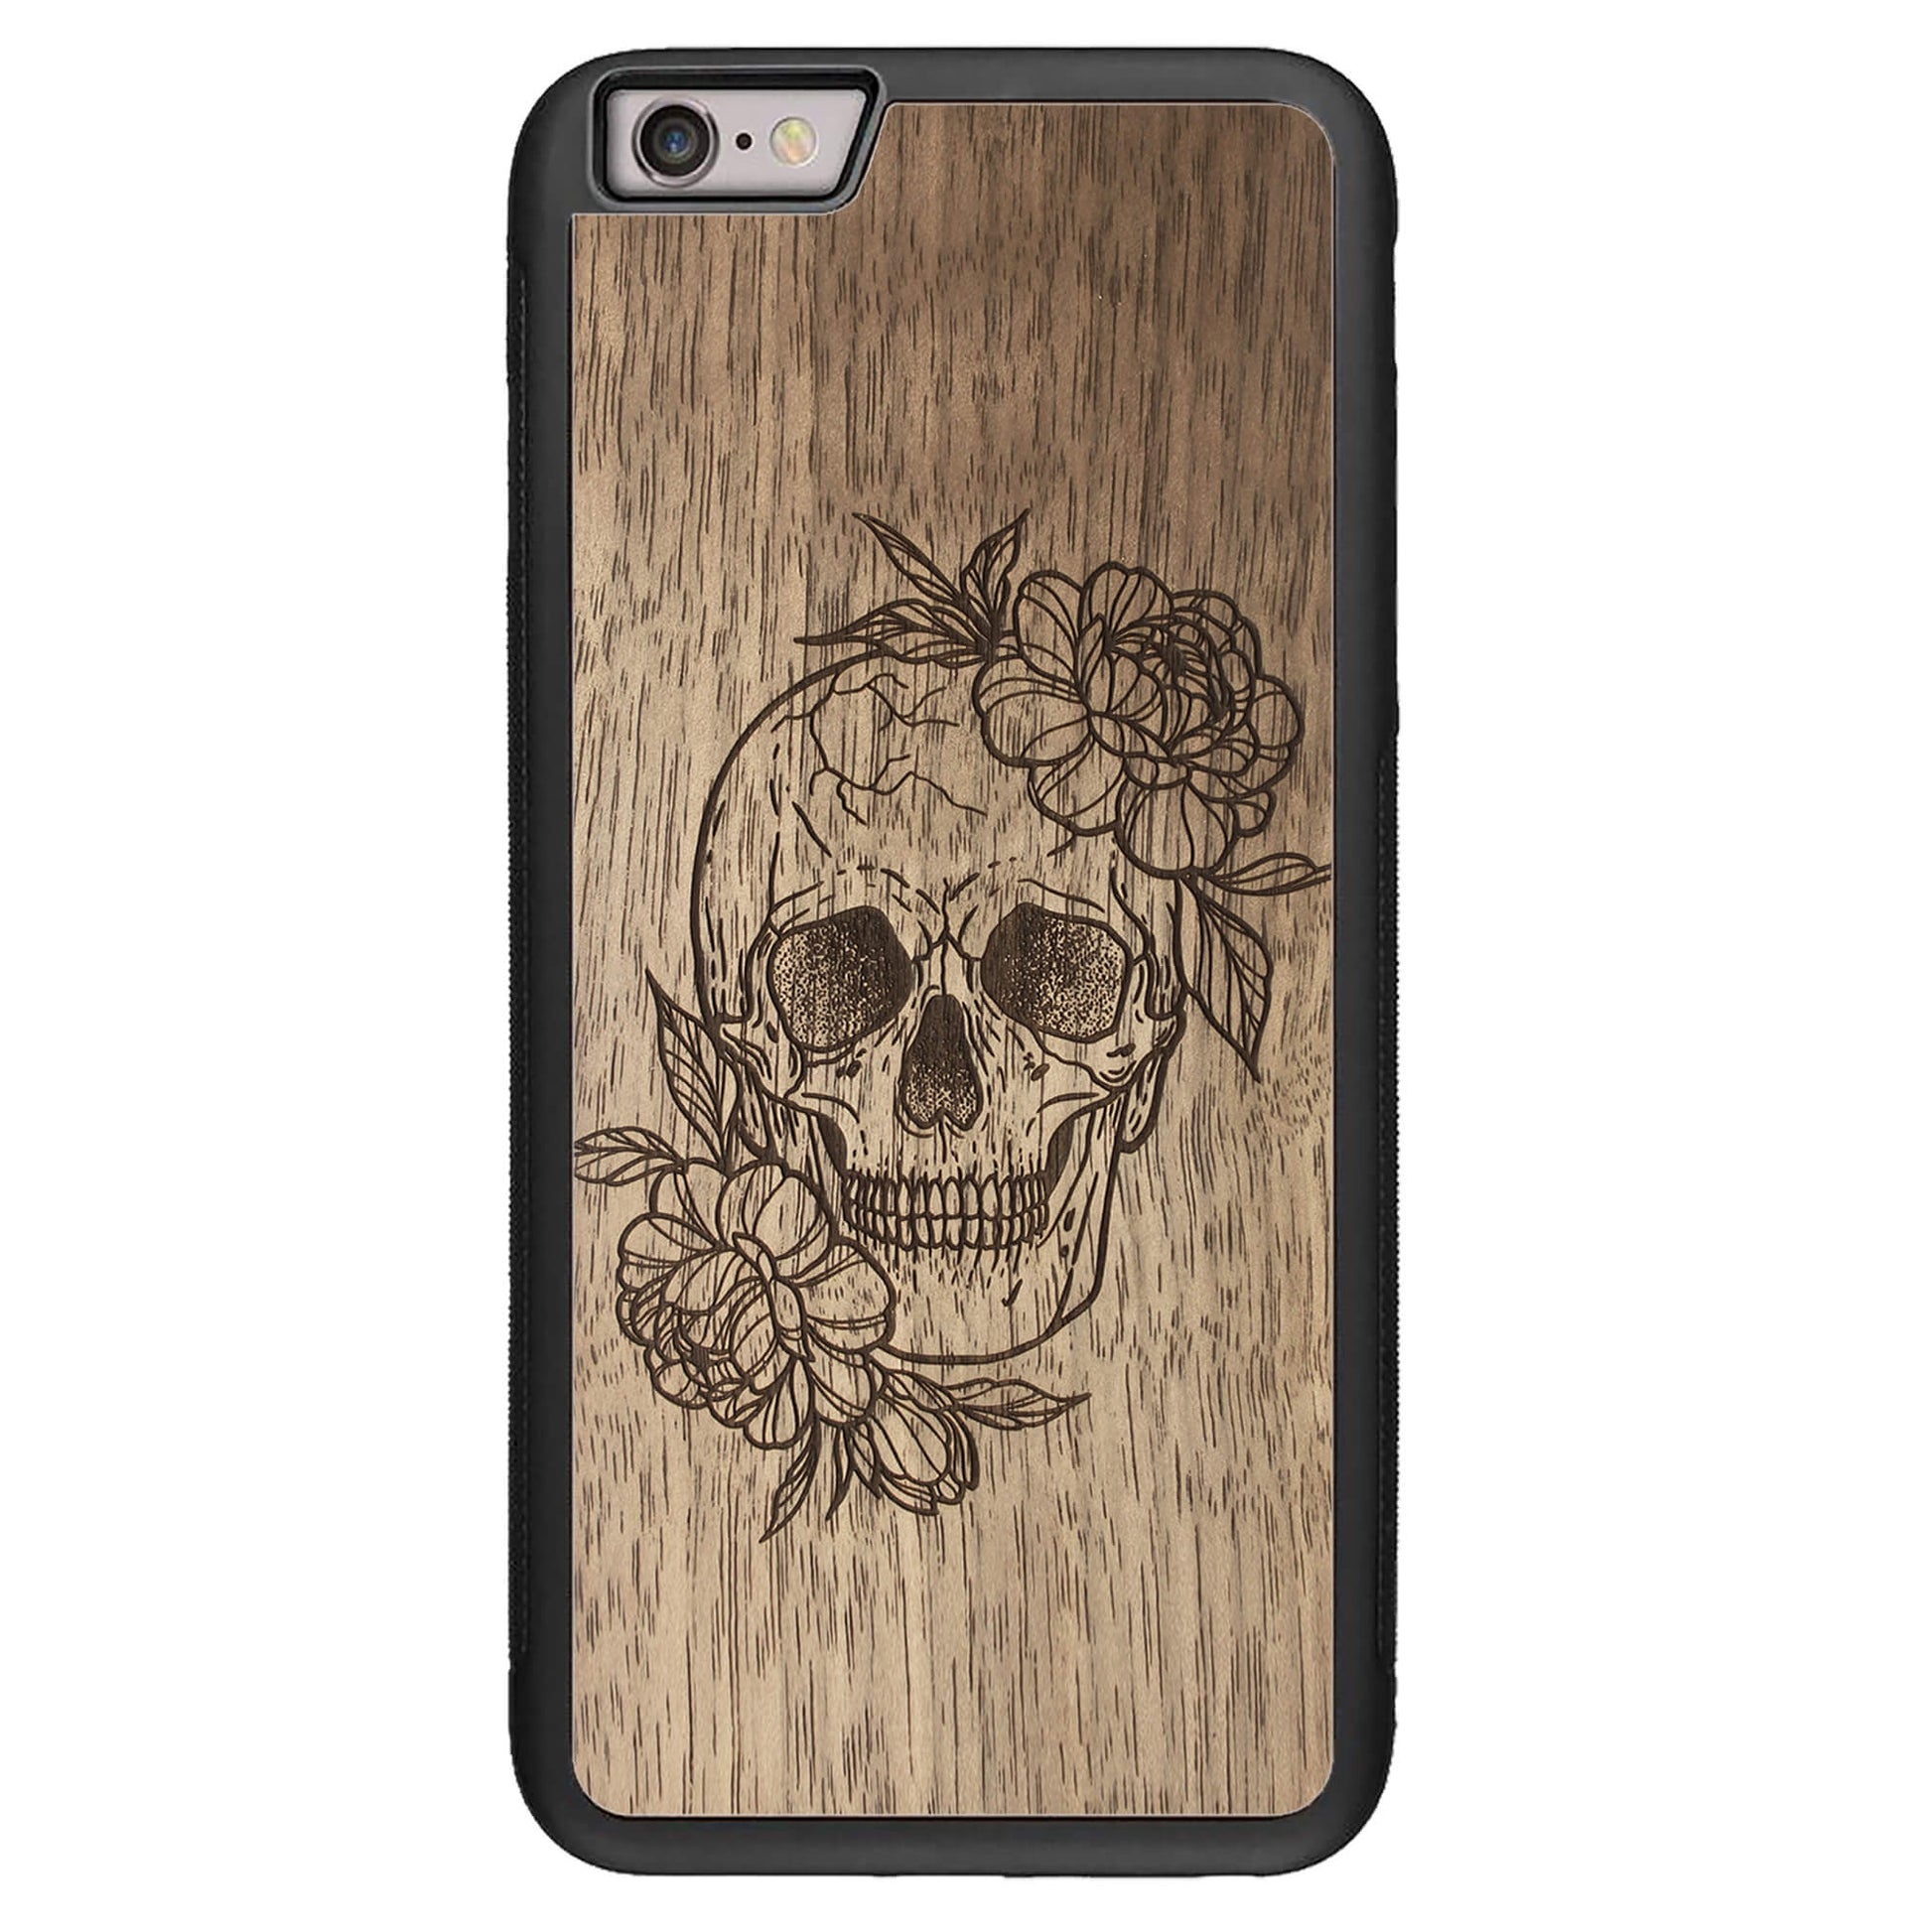 Wooden Case for iPhone 6/6S Plus Skull